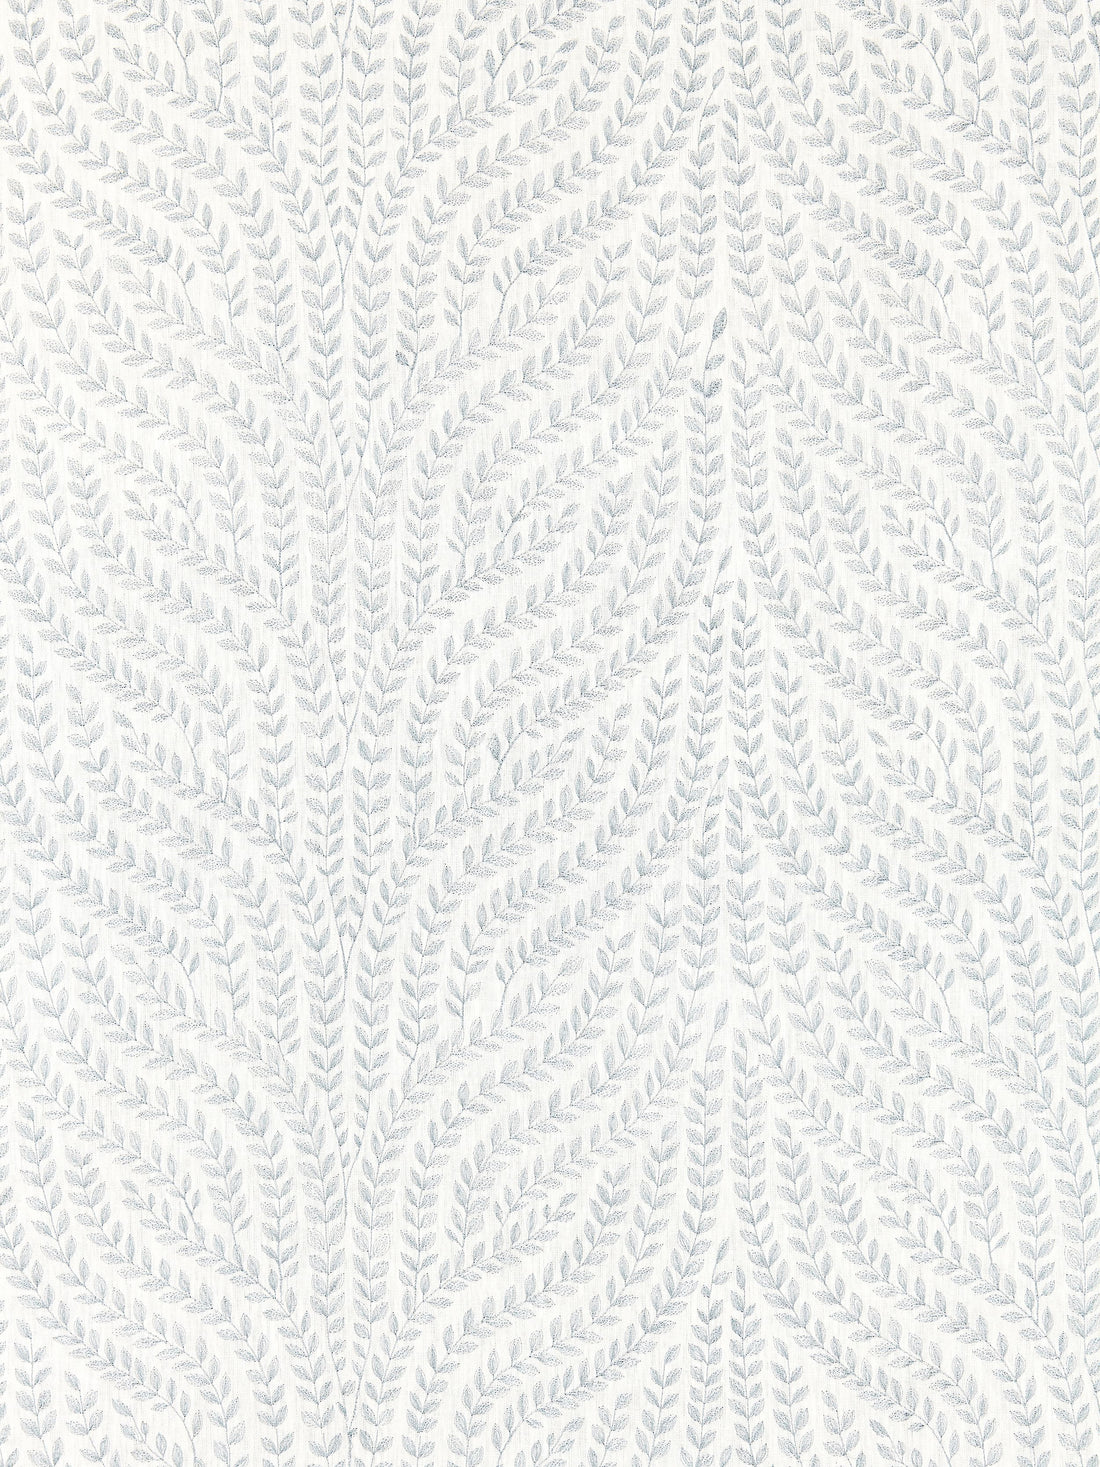 Willow Vine Embroidery fabric in aquamarine color - pattern number SC 000127125 - by Scalamandre in the Scalamandre Fabrics Book 1 collection